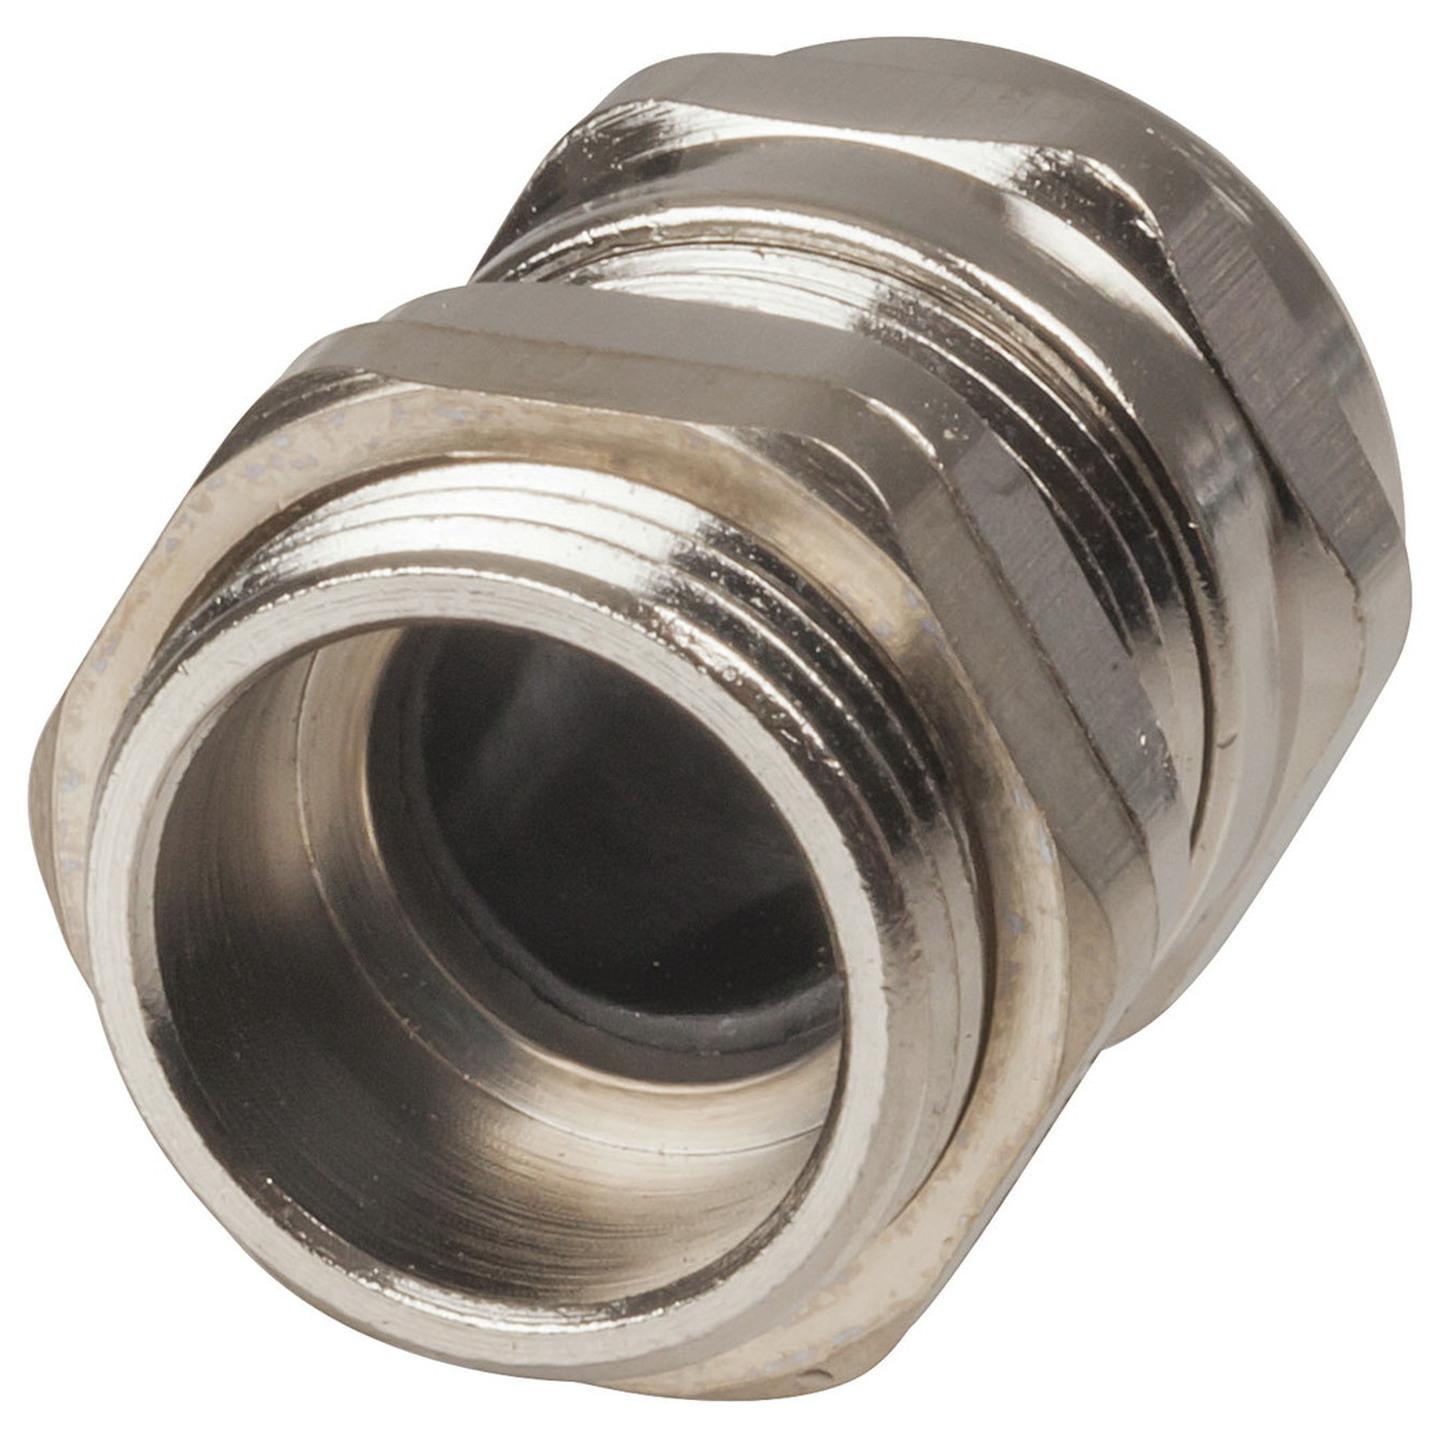 IP68 Nickel Plated Copper Cable Glands 5 to 10mm Pack of 2